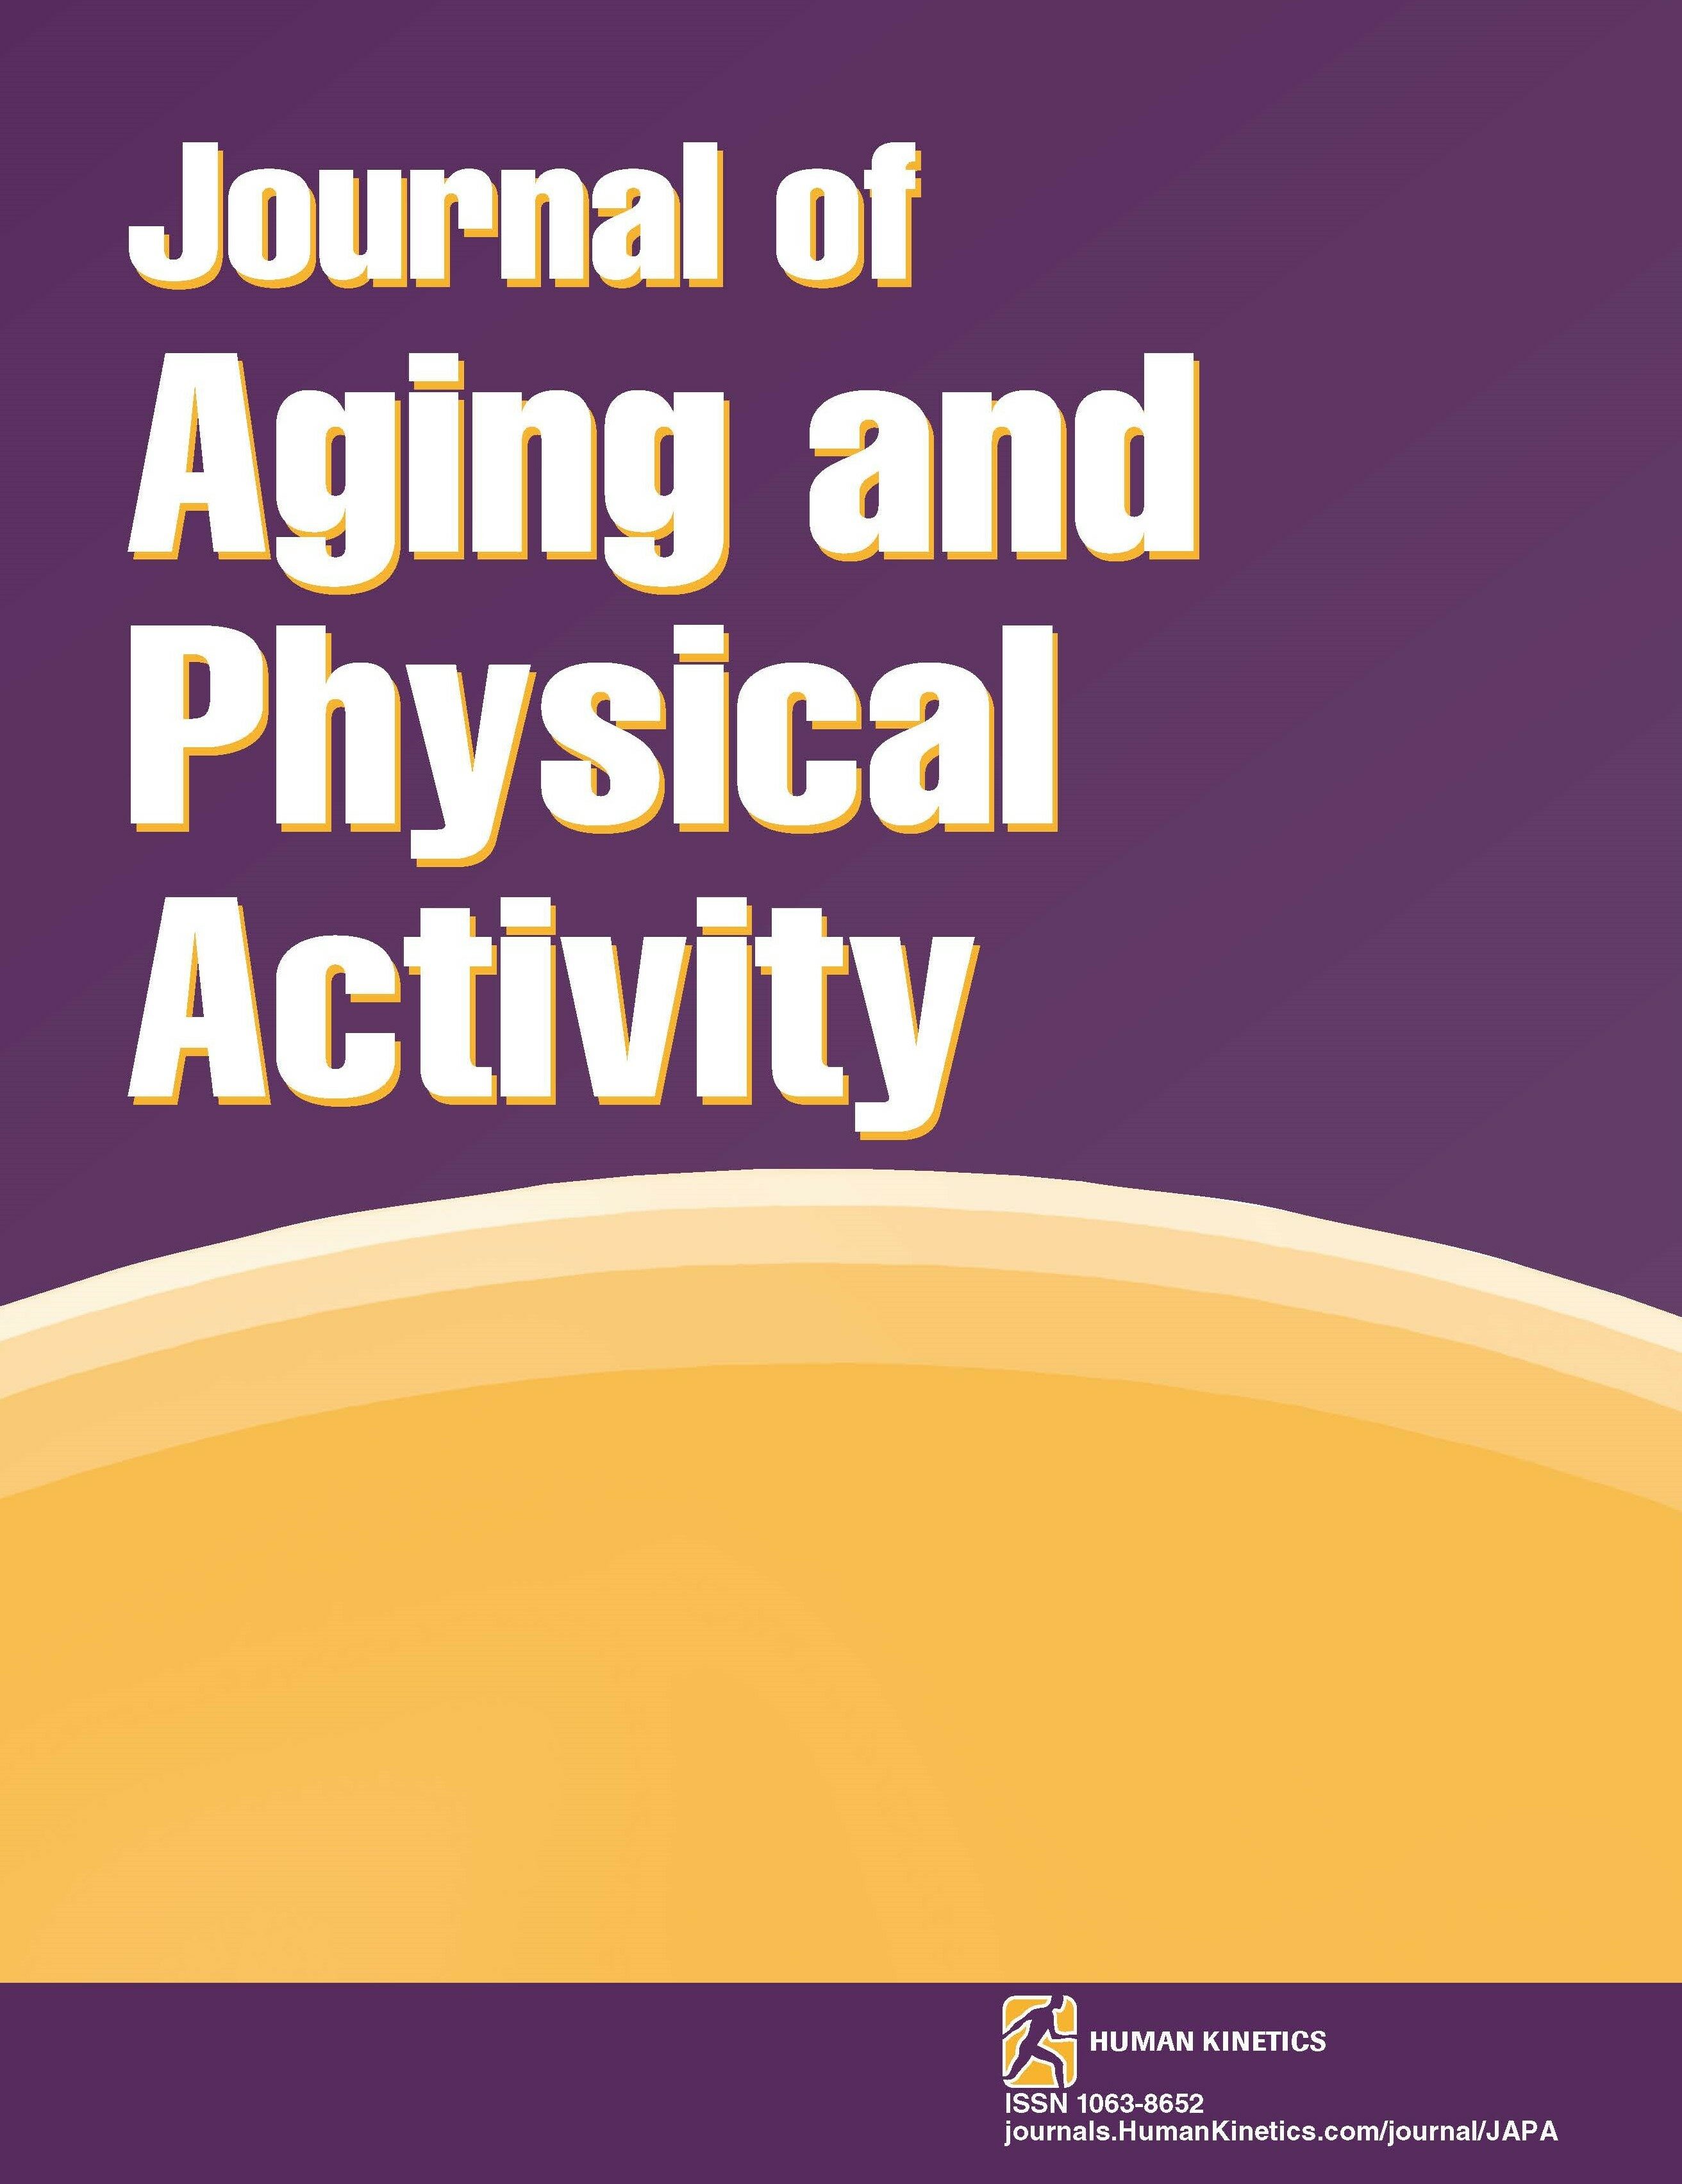 Use of Dual-Task Timed-Up-and-Go Tests for Predicting Falls in Physically Active, Community-Dwelling Older Adults—A Prospective Study